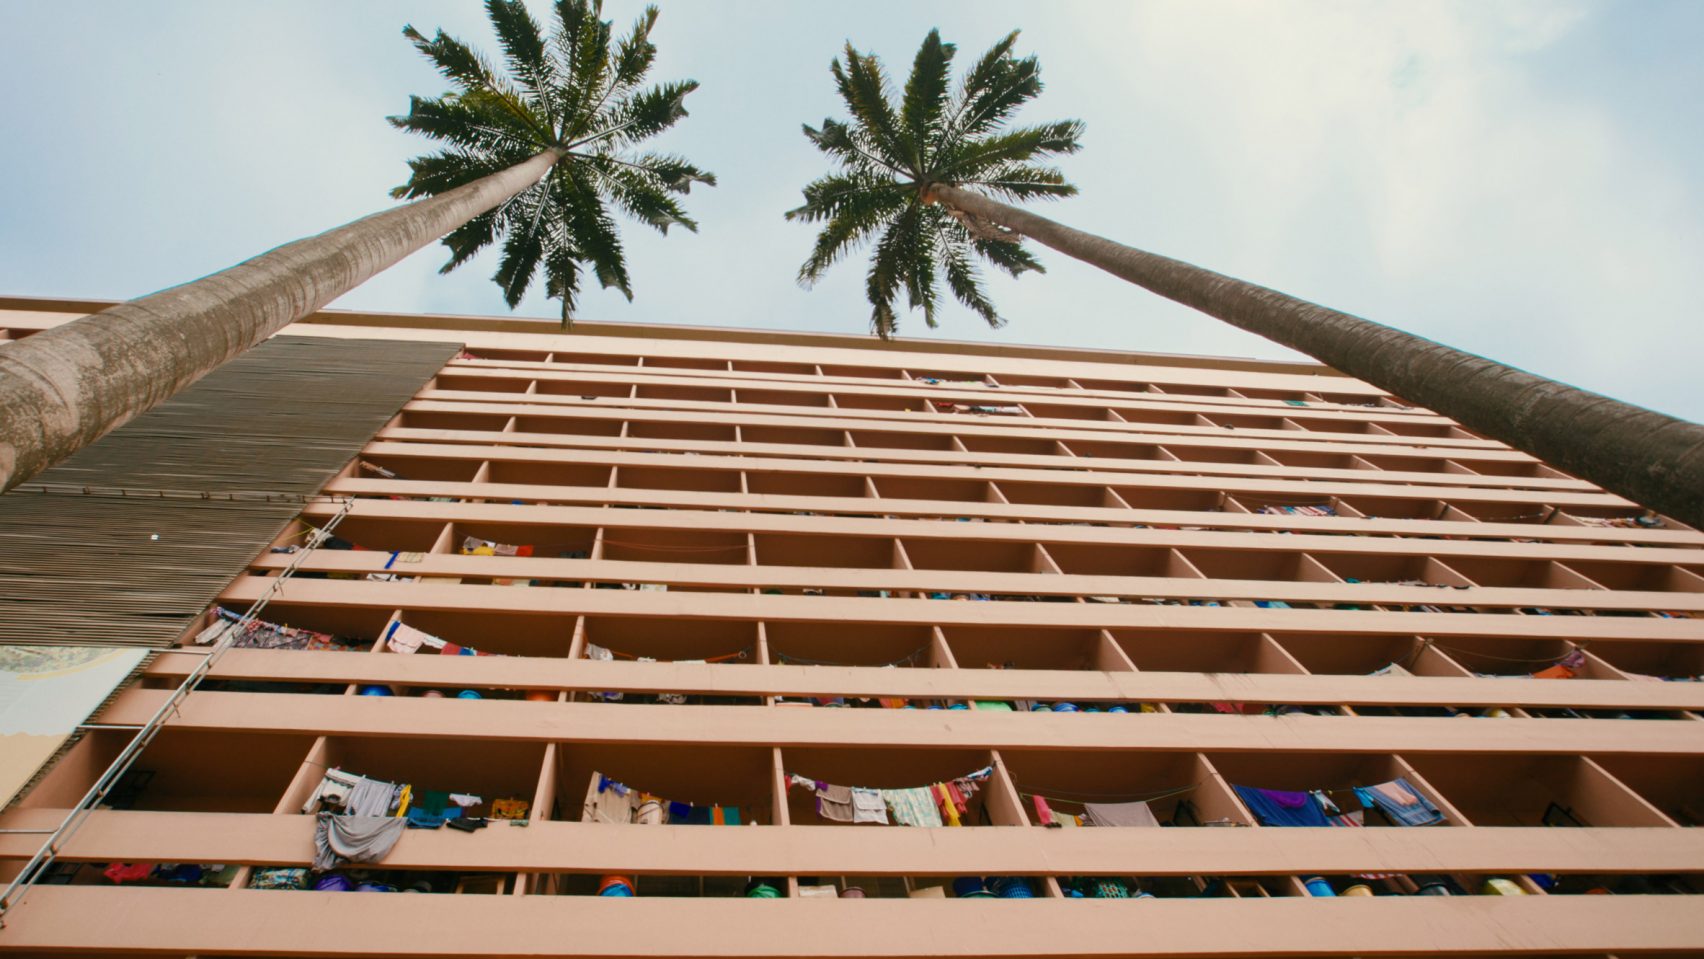 Tropical Modernism: Architecture and Independence At The V&A Museum